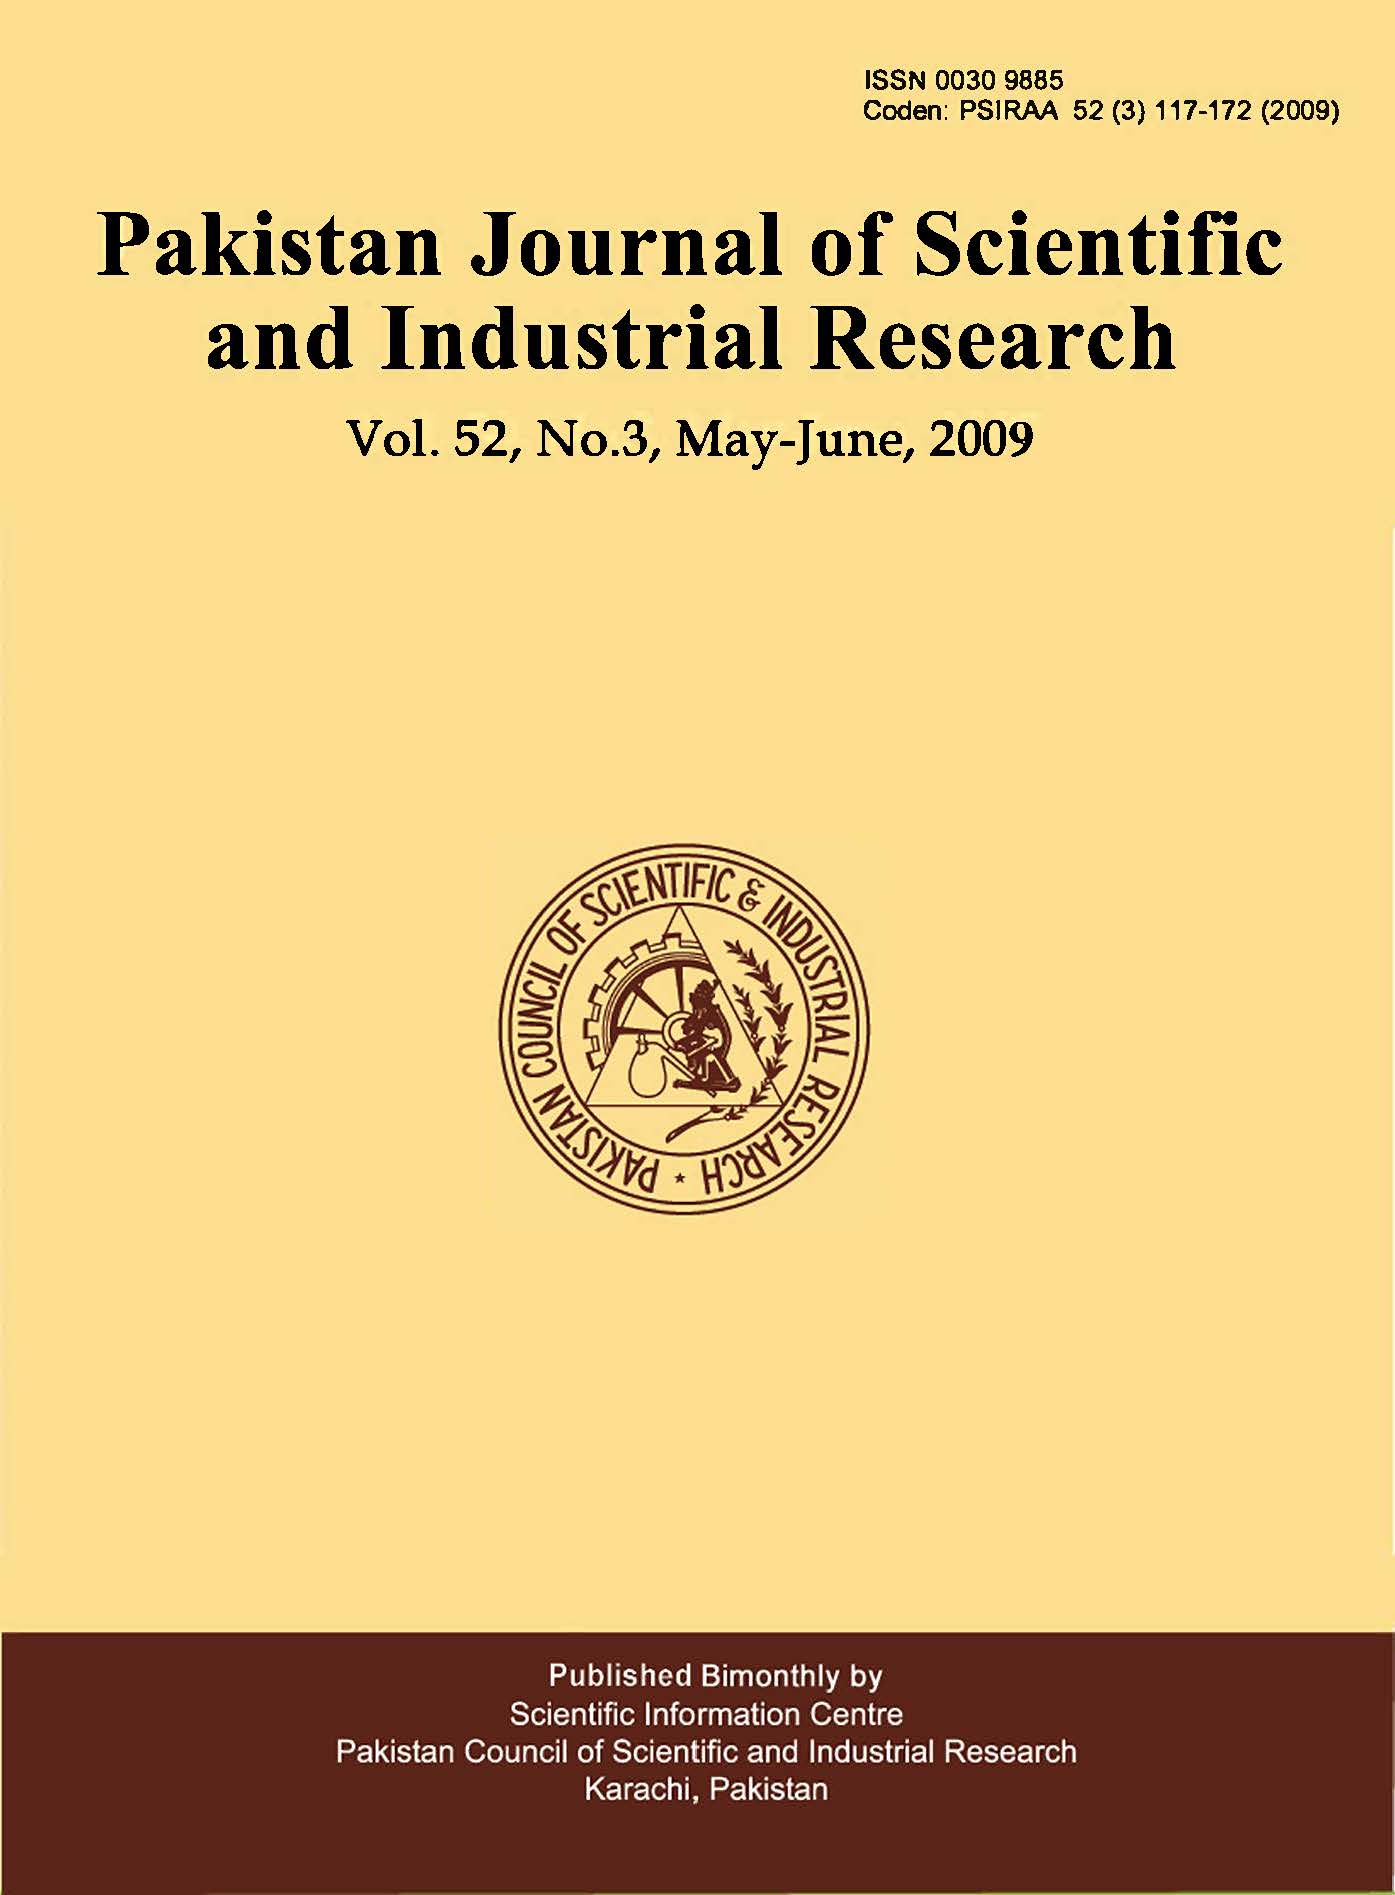 					View Vol. 52 No. 3 (2009): Pakistan Journal of Scientific and Industrial Research
				